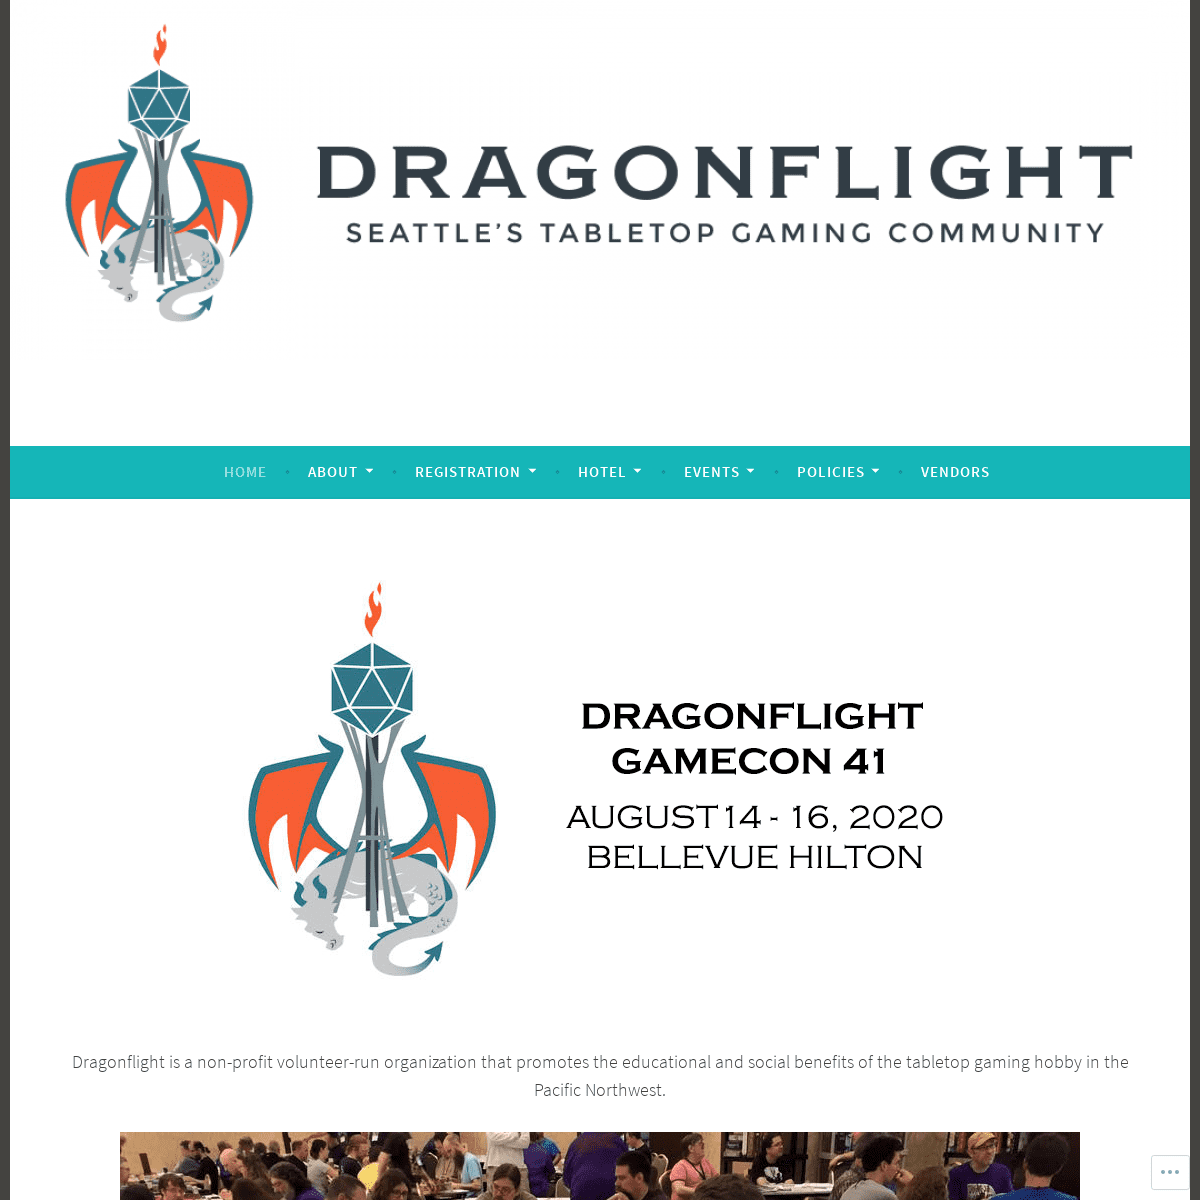 A complete backup of dragonflight.org